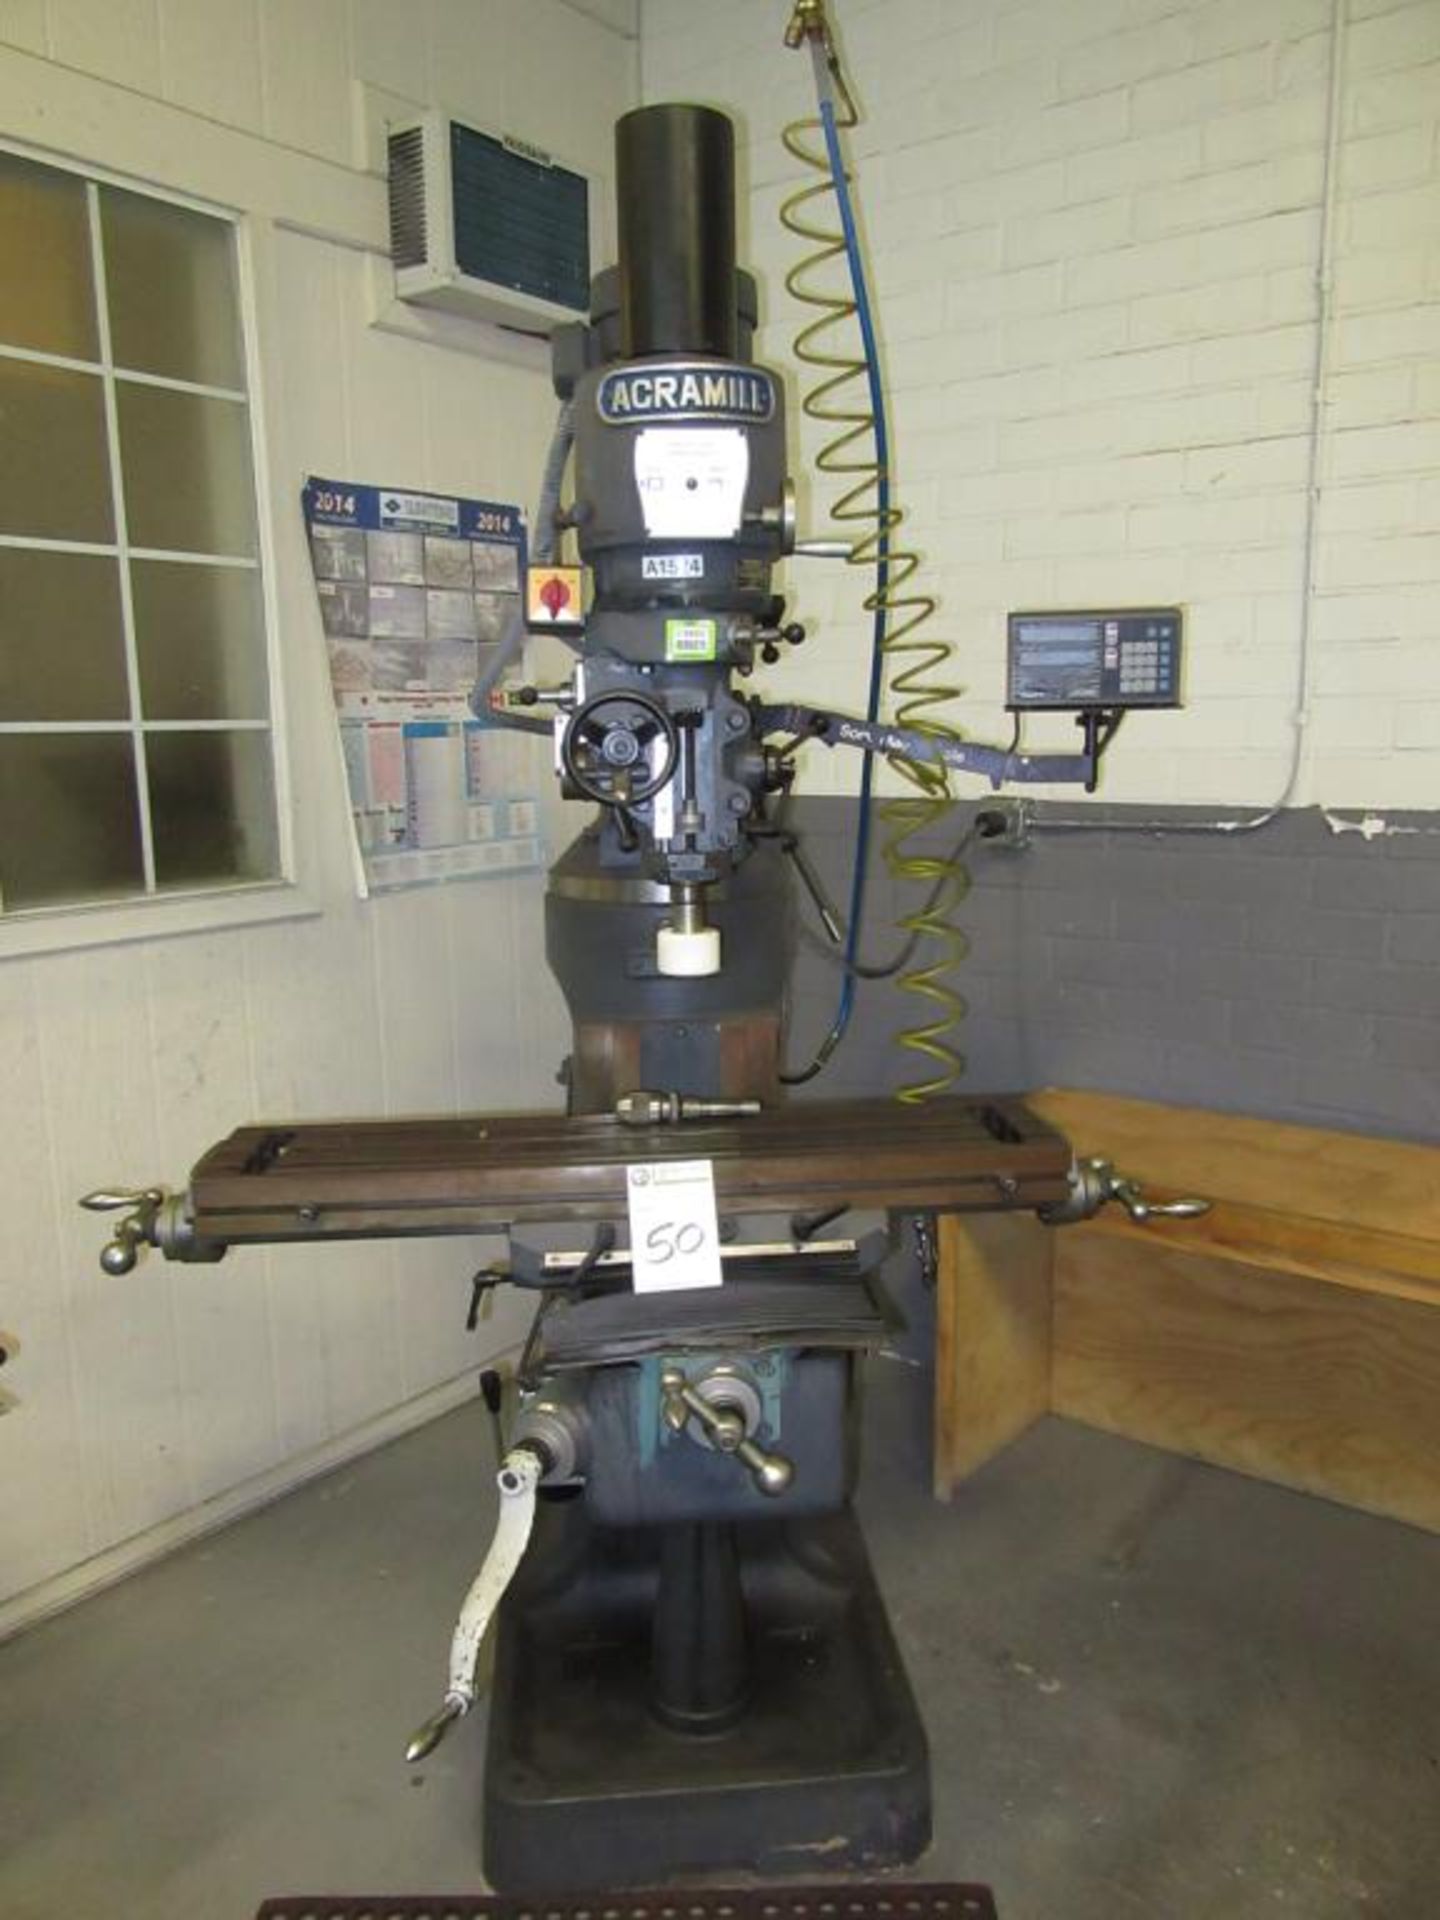 Acramill LS-2S Vertical Milling Machine 60 - 4200 RPM with T-Slot Table 42"L x 9"W, 2-Axis DRO, 2. - Image 3 of 7